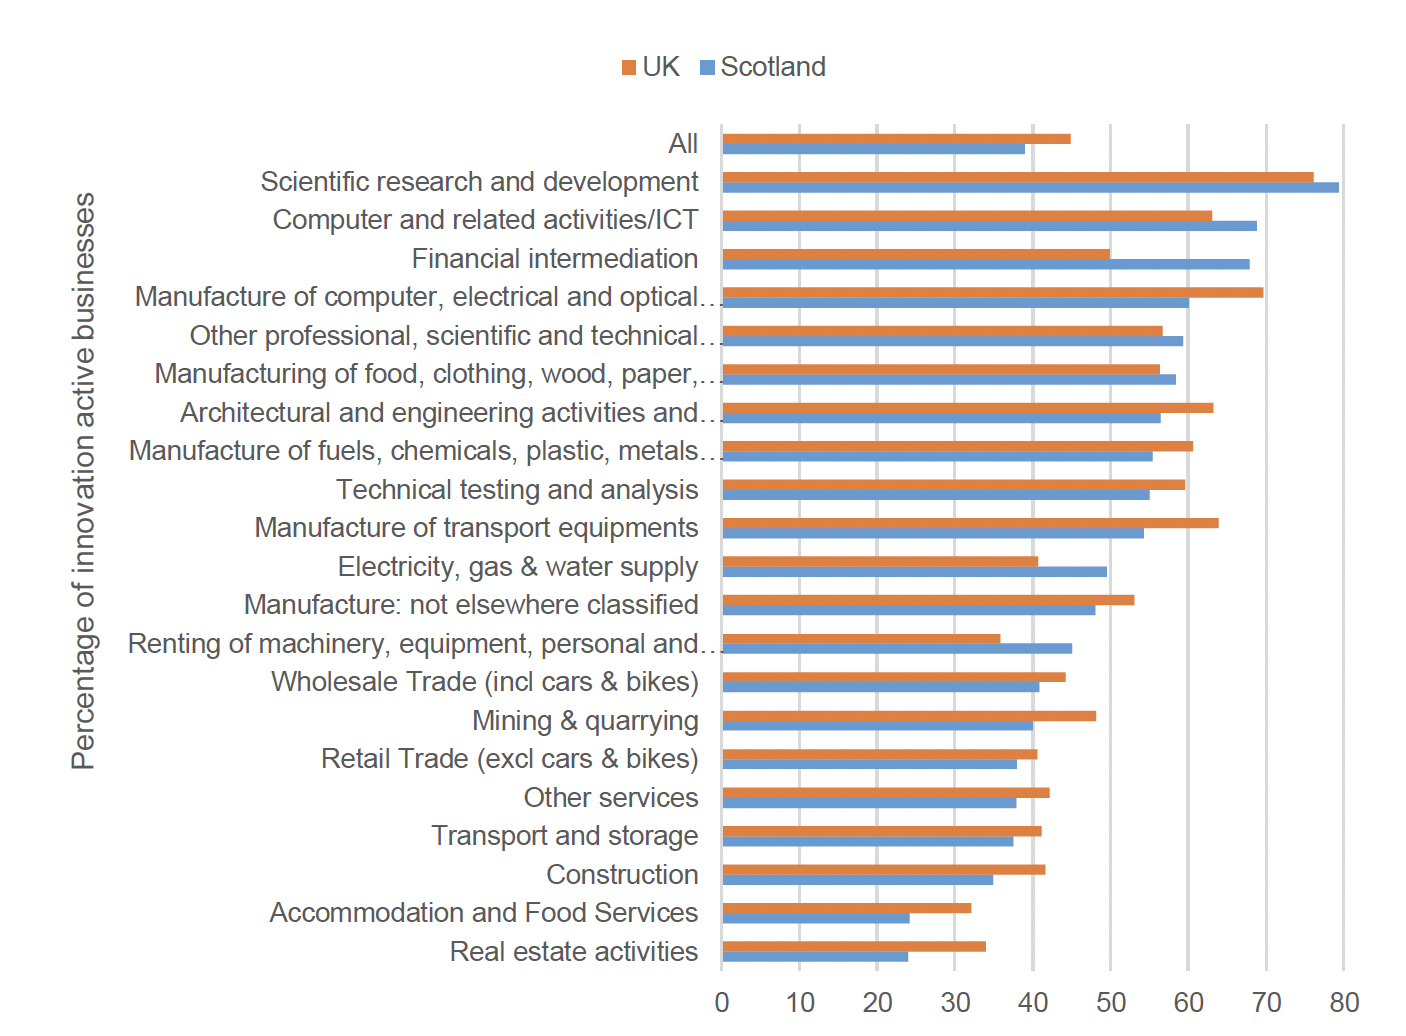 figure 9 shows a comparison of innovation active busienesses by sector in the UK and Scotland for comparison, the UK outperforms on average, however there are sectors where Scotland outperforms the UK. 